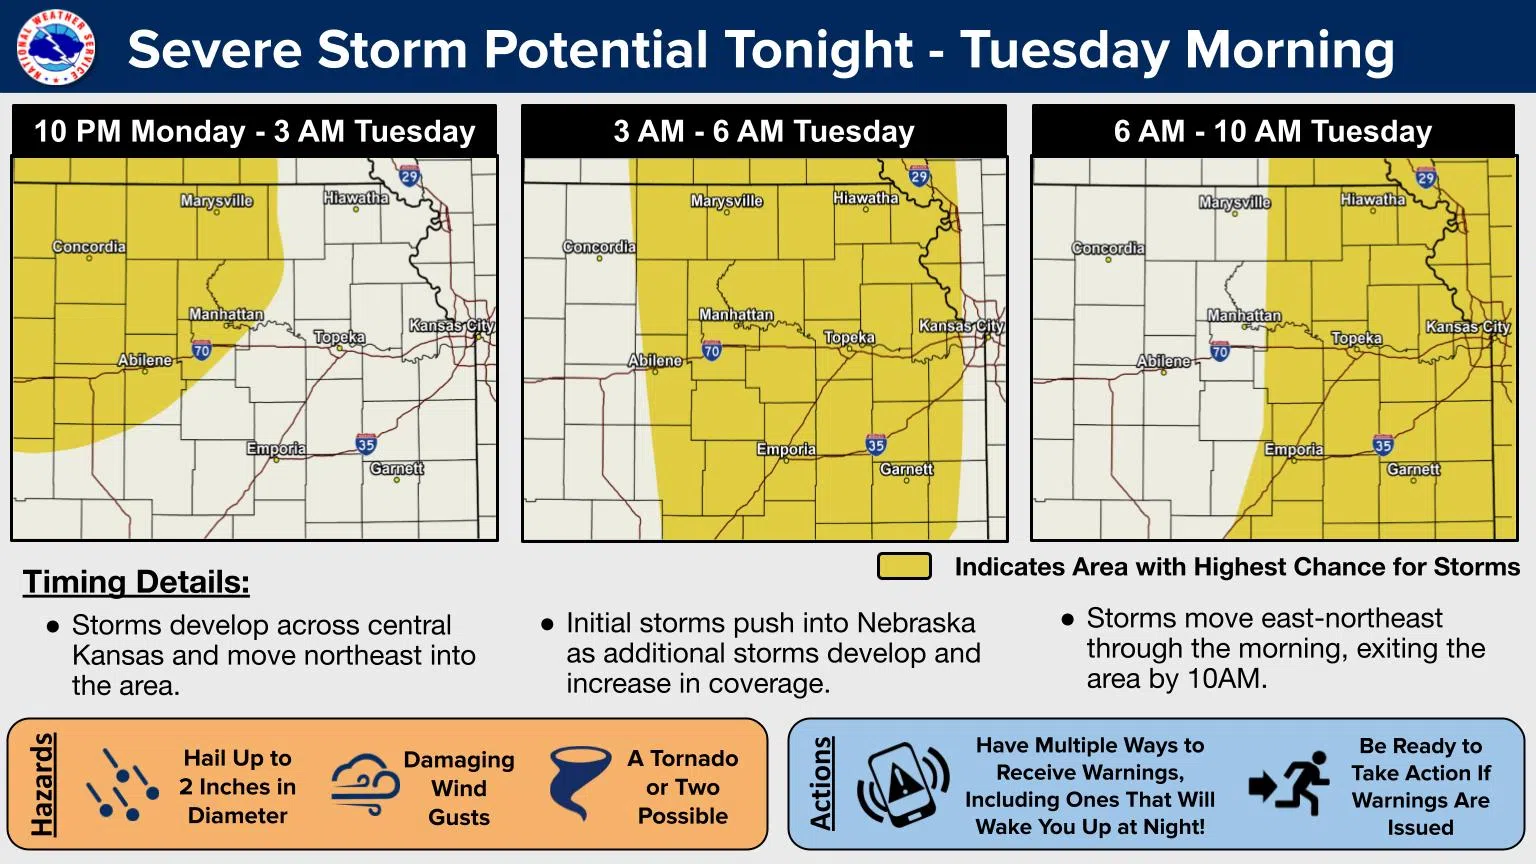 WEATHER: Strong storms expected after midnight early Tuesday